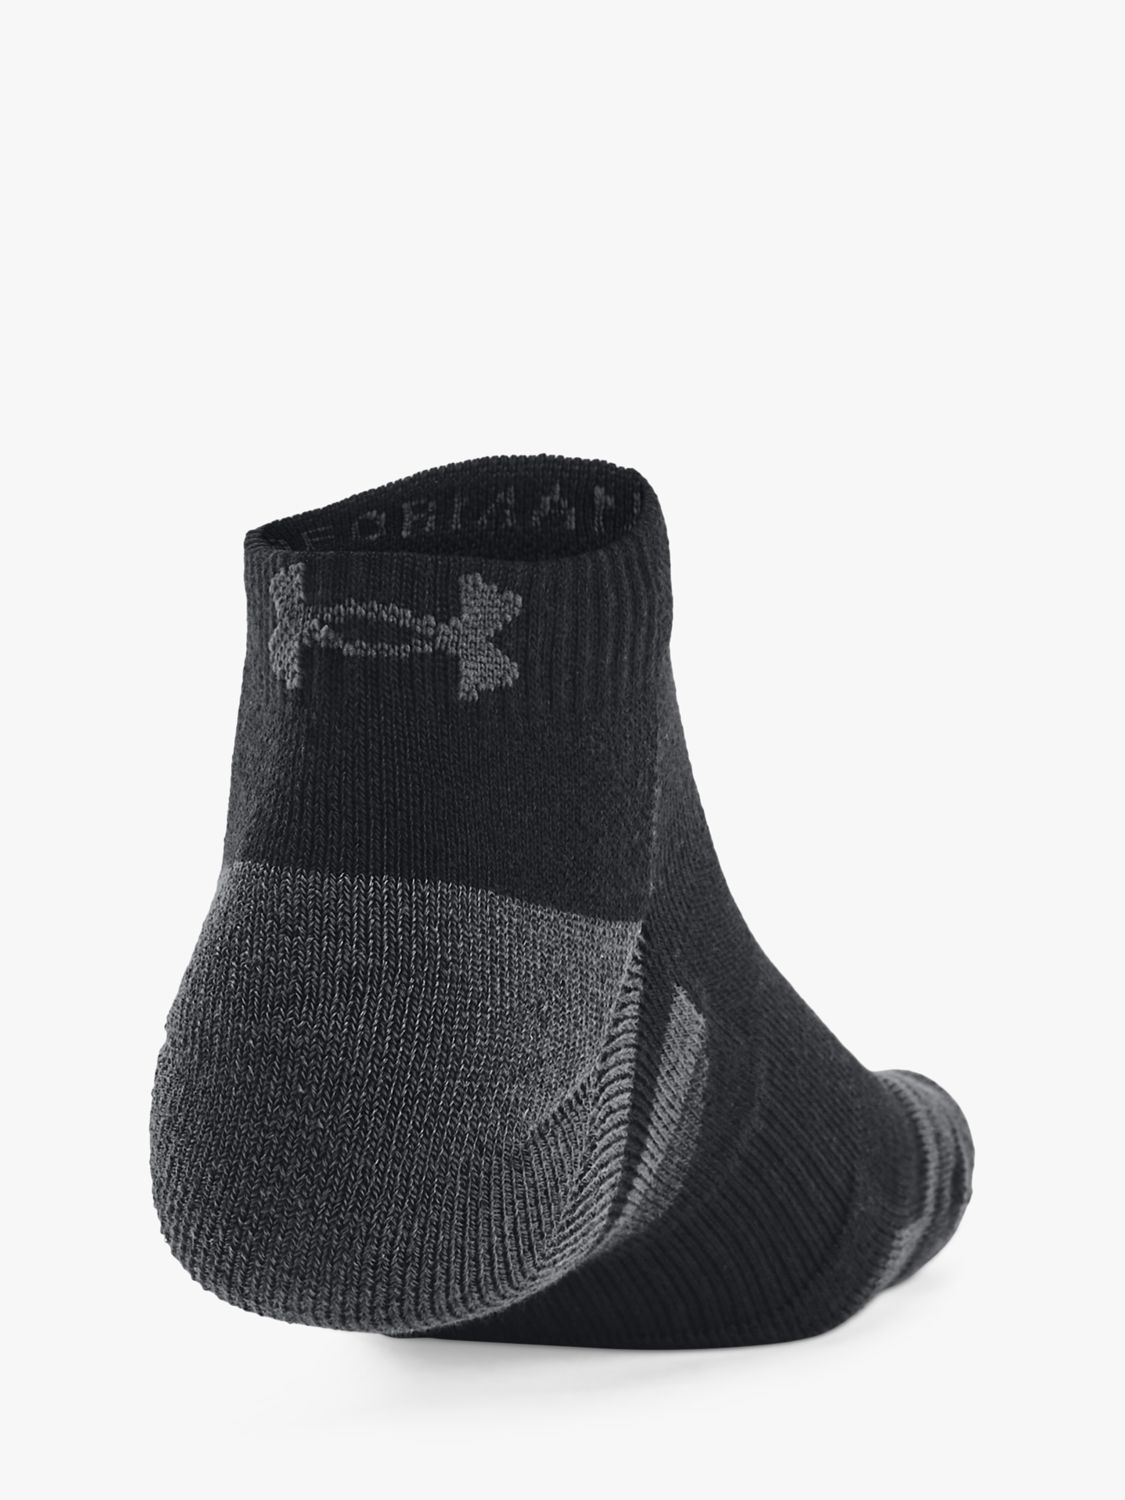 Under Armour Performance Tech Mid Socks 3 Pack - Mod Gray/White